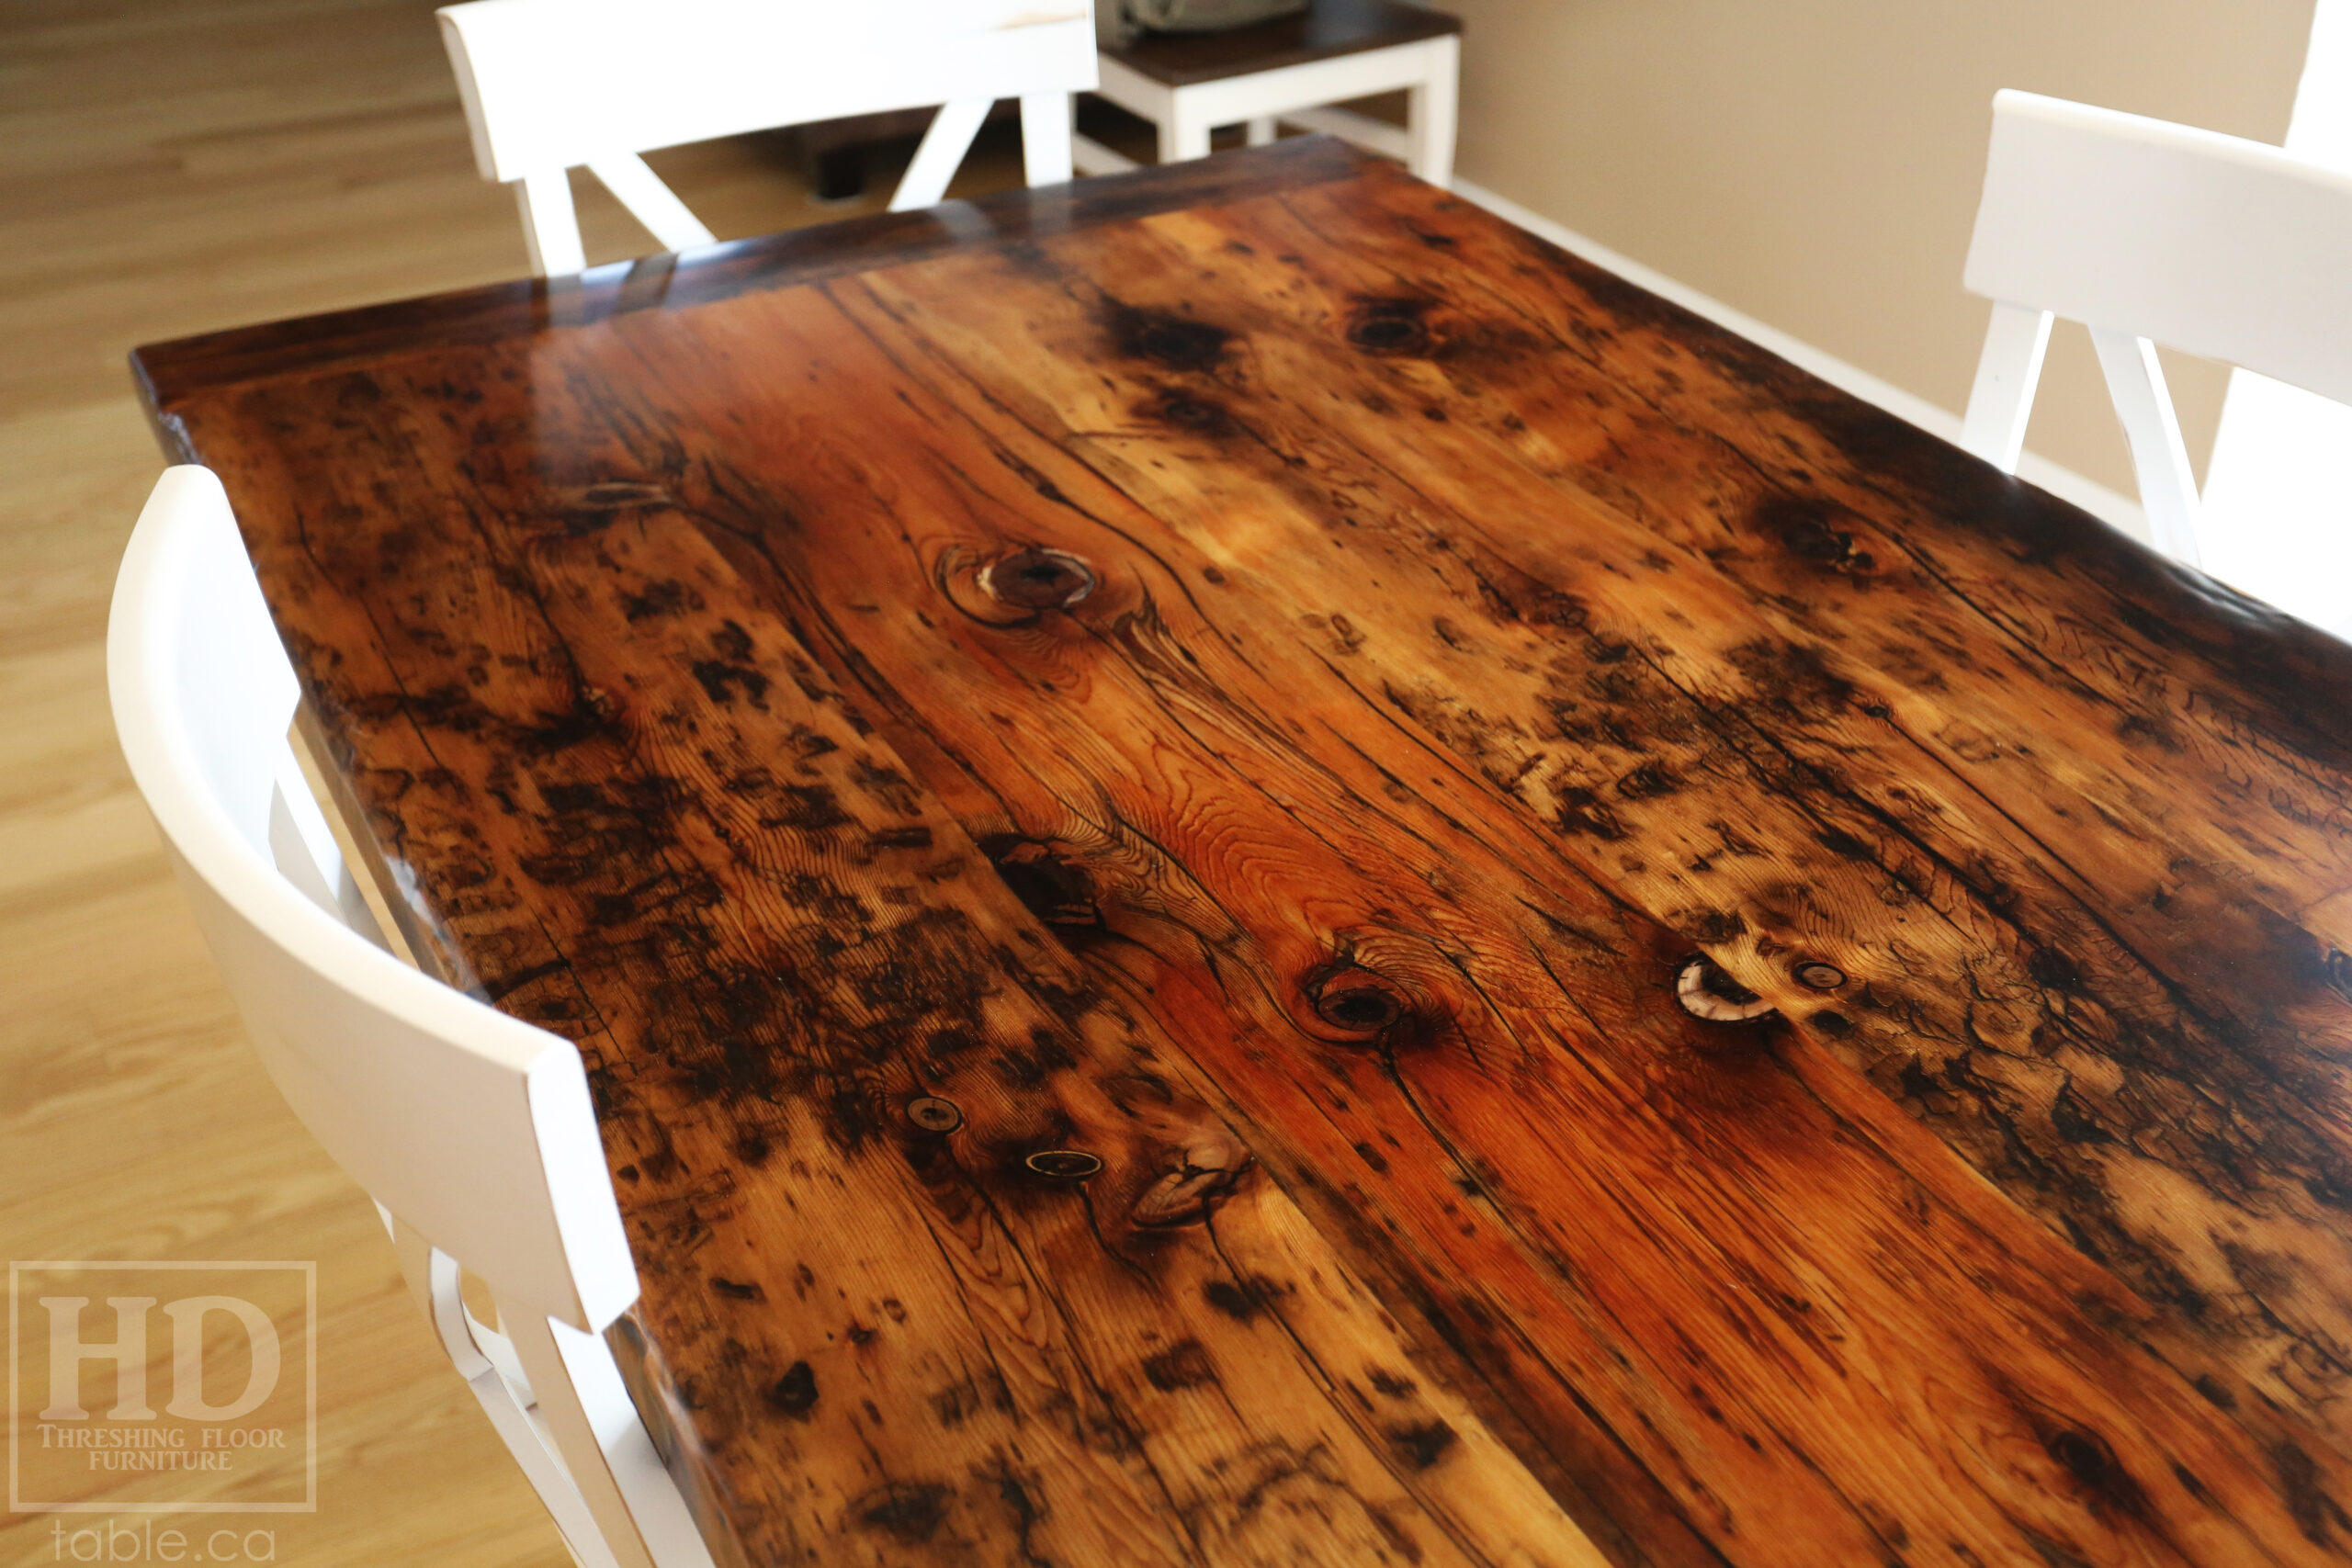 Project Summary: 6’ Reclaimed Ontario Barnwood Table we made for a Schomberg, Ontario home – 38” wide – Harvest Base: Turned Windbrace Beam Legs [18” inset from ends] / White with Sandthroughs Skirting & Legs - Old Growth Hemlock Threshing Floor Construction - Original edges & distressing maintained – Bread Edge Boards – Premium epoxy + satin polyurethane finish – One 18” Leaf Extension – [6] X Back Chairs / Wormy Maple / White with Sandthroughs Frame + Seat Stained Colour of Table Top – Polyurethane clearcoat finish - www.table.ca